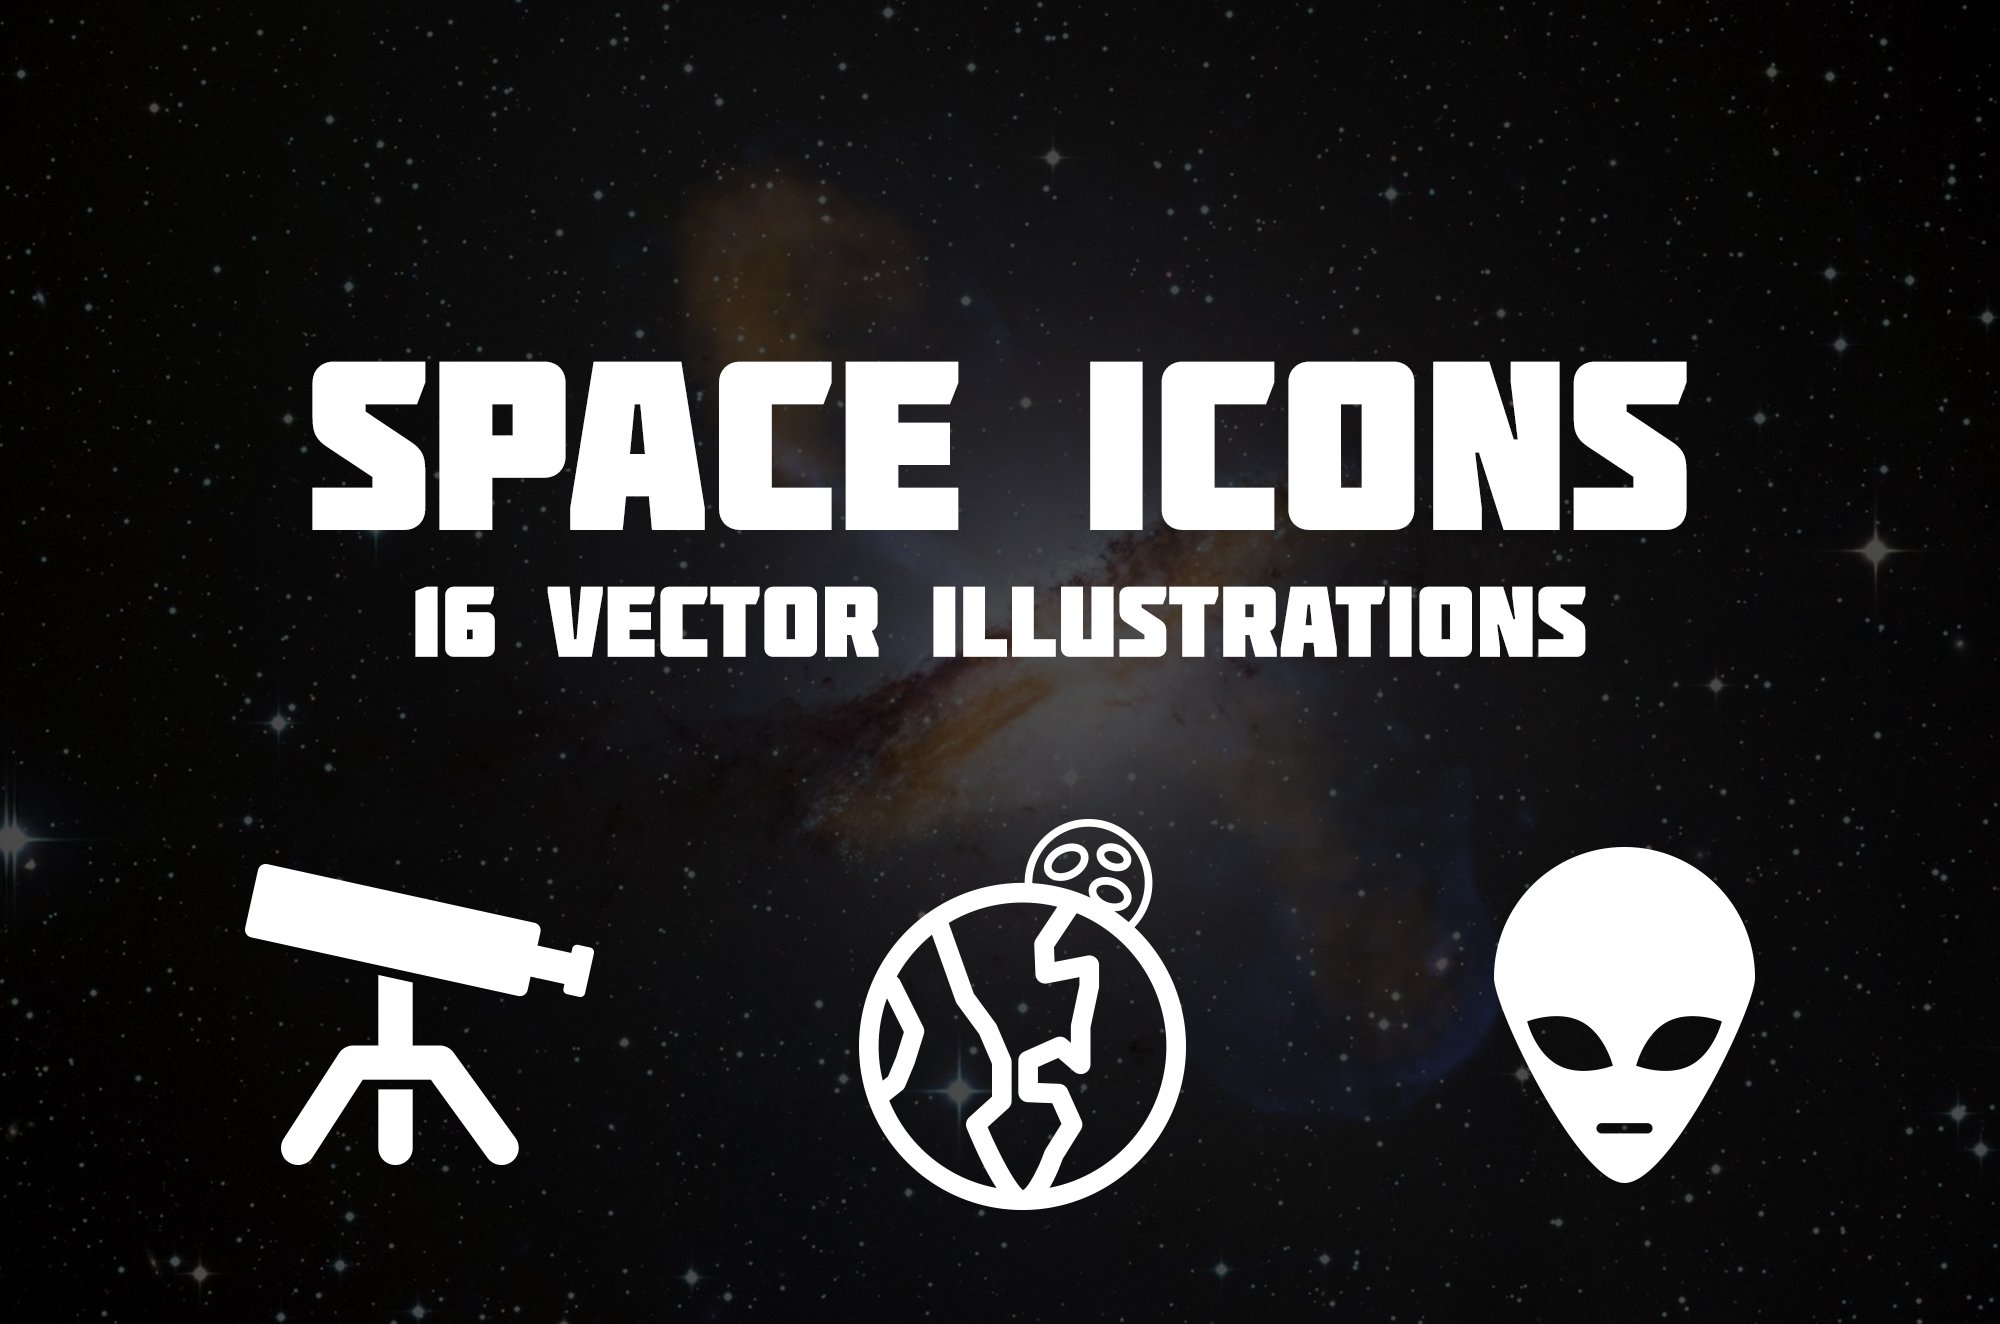 Space Icons - Set of 16 Vectors cover image.